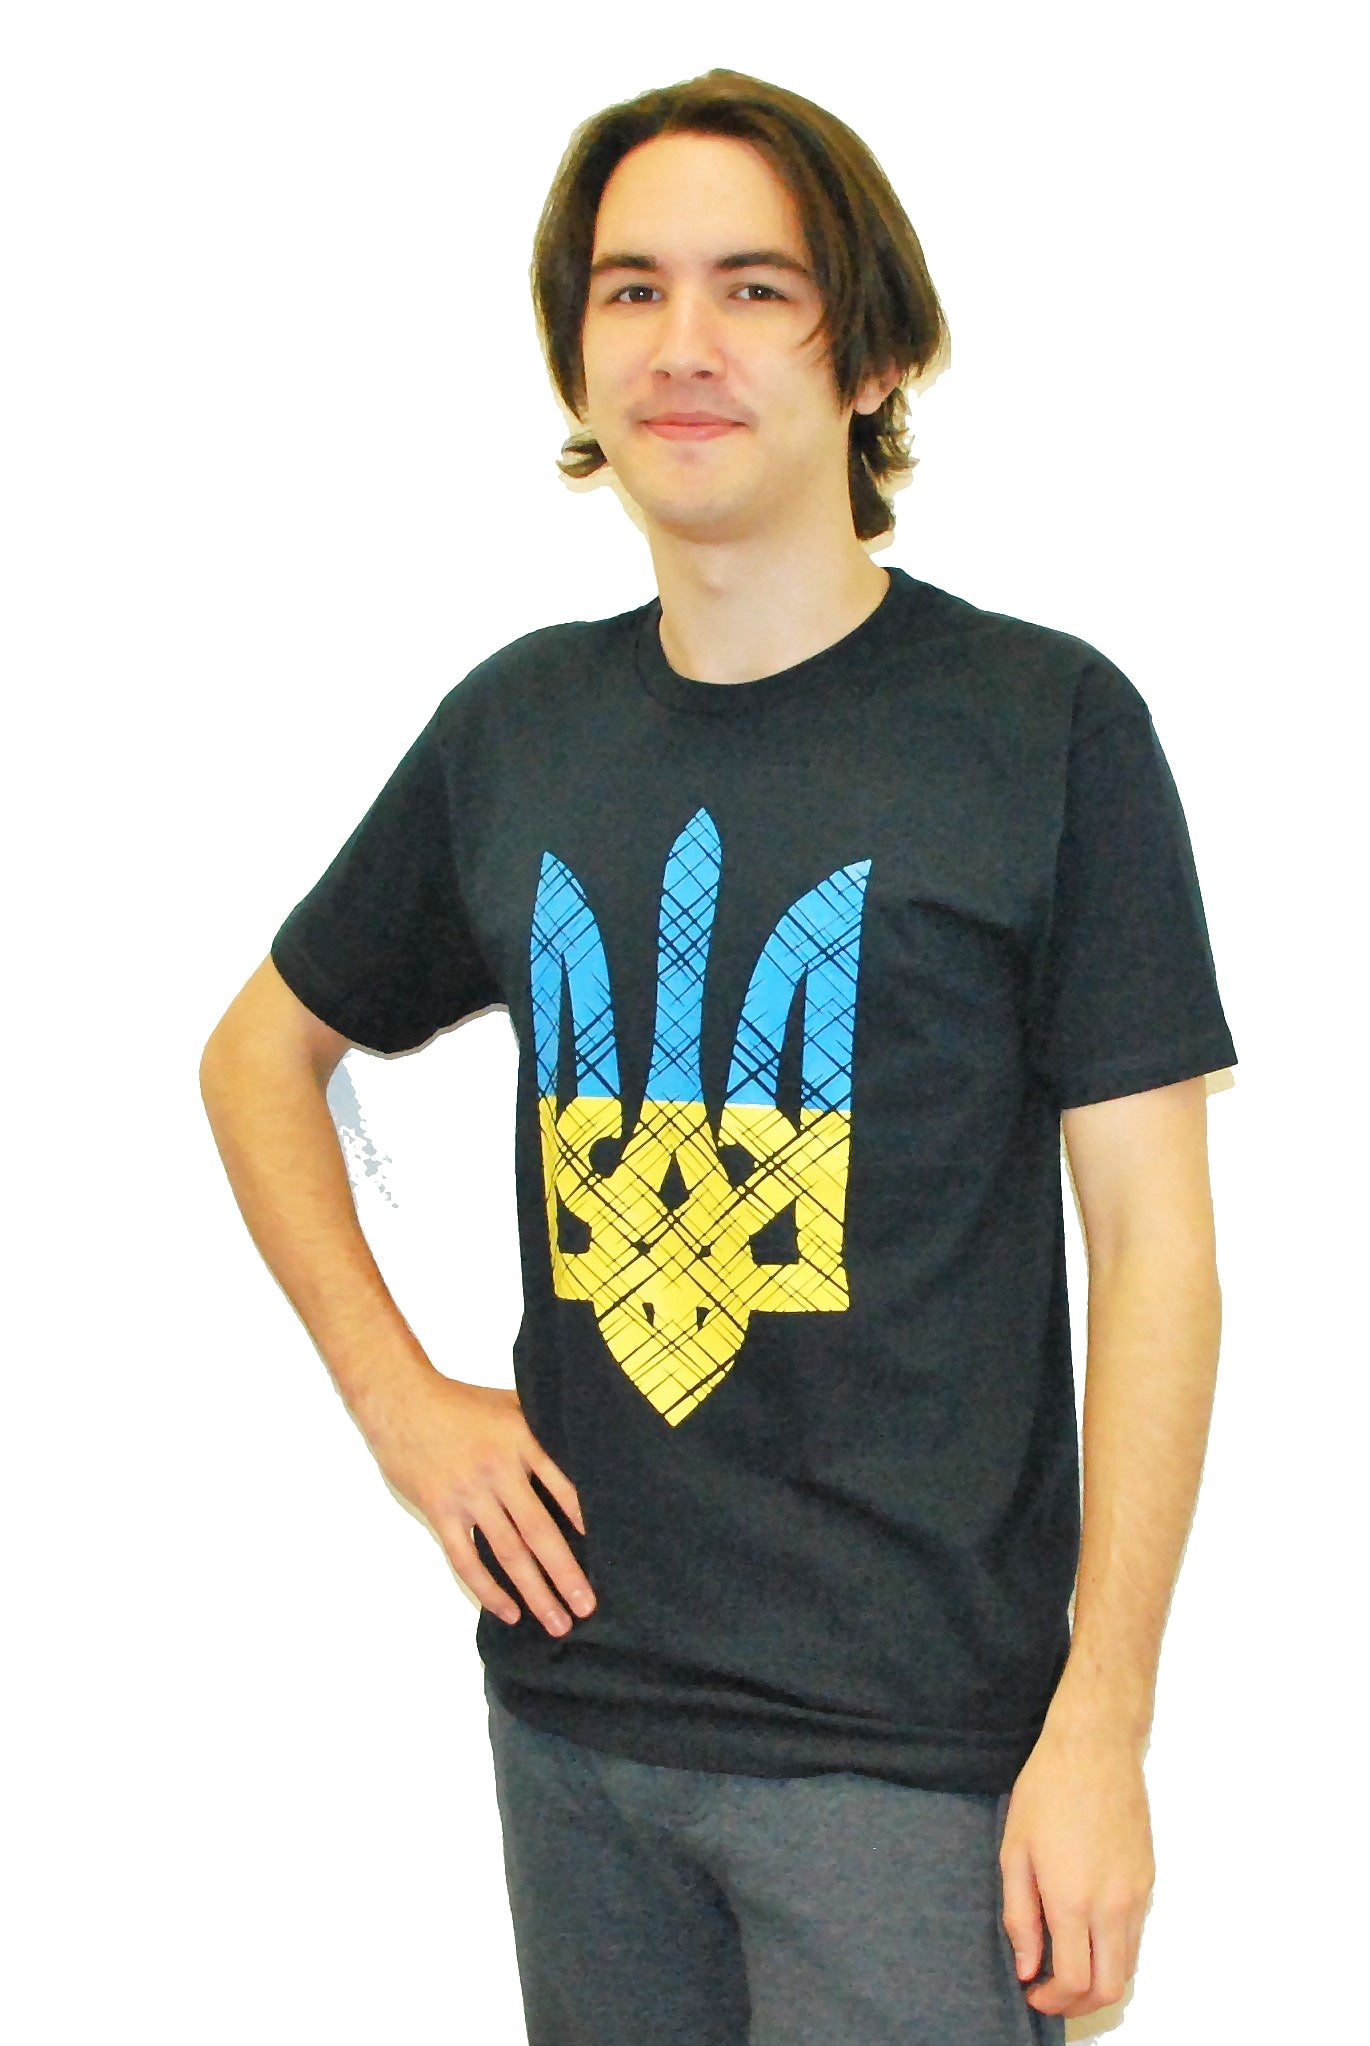 Adult t-shirt "Blue and yellow Trident"